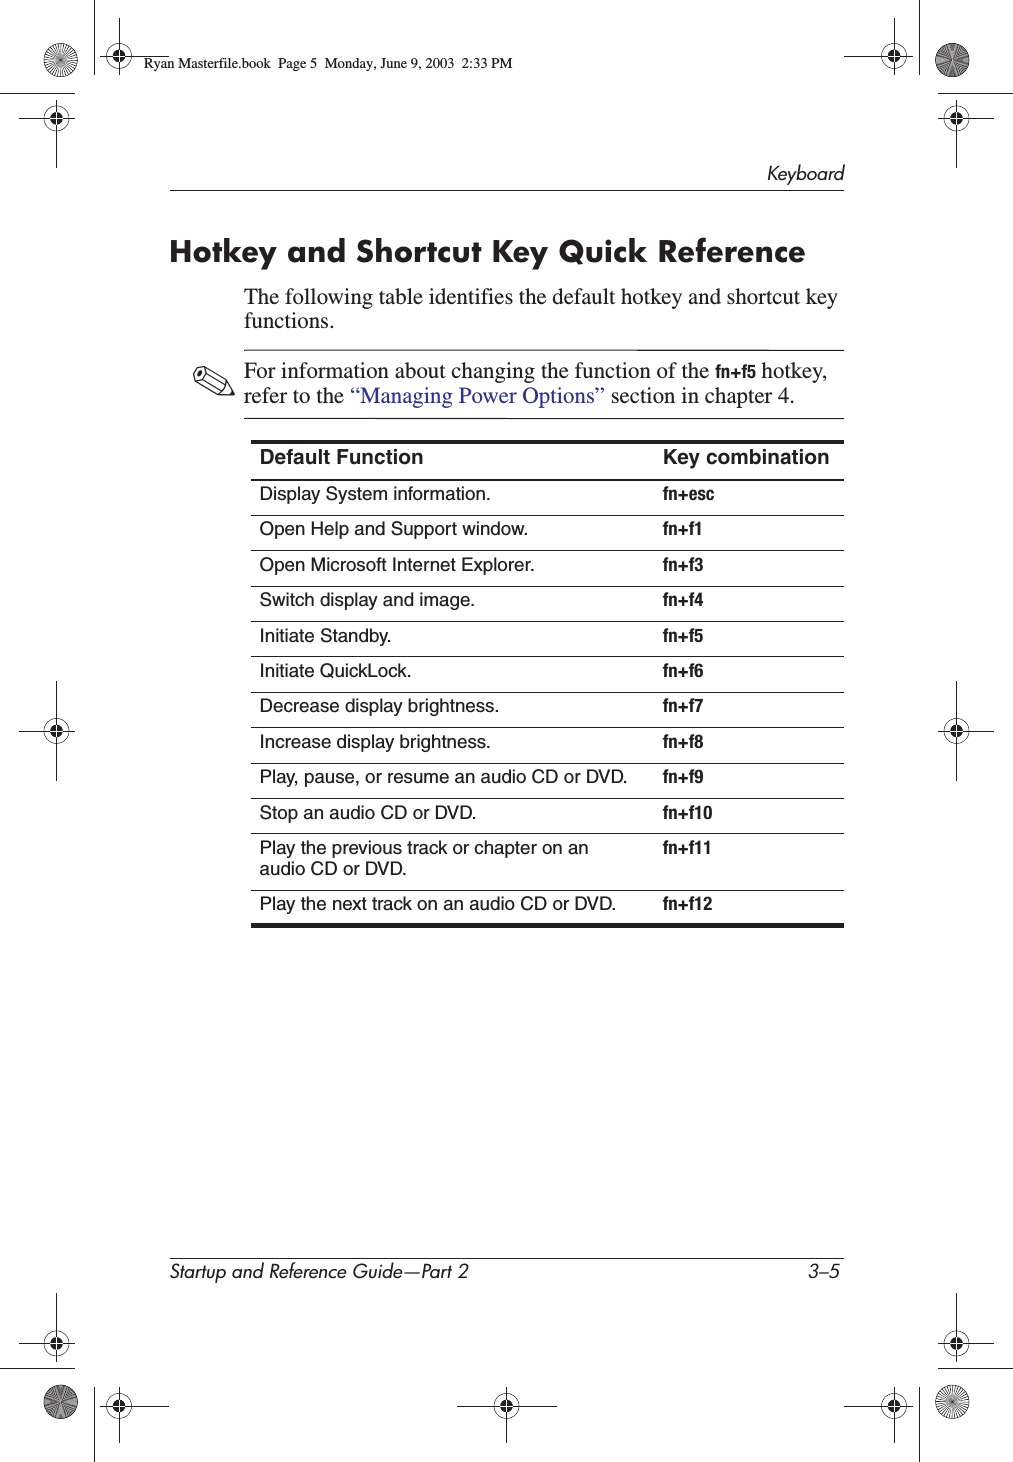 KeyboardStartup and Reference Guide—Part 2 3–5Hotkey and Shortcut Key Quick ReferenceThe following table identifies the default hotkey and shortcut key functions.✎For information about changing the function of the fn+f5 hotkey, refer to the “Managing Power Options” section in chapter 4.Default Function Key combinationDisplay System information. fn+escOpen Help and Support window. fn+f1Open Microsoft Internet Explorer. fn+f3Switch display and image. fn+f4Initiate Standby. fn+f5Initiate QuickLock. fn+f6Decrease display brightness. fn+f7Increase display brightness. fn+f8Play, pause, or resume an audio CD or DVD. fn+f9Stop an audio CD or DVD. fn+f10Play the previous track or chapter on an audio CD or DVD.fn+f11Play the next track on an audio CD or DVD. fn+f12Ryan Masterfile.book  Page 5  Monday, June 9, 2003  2:33 PM